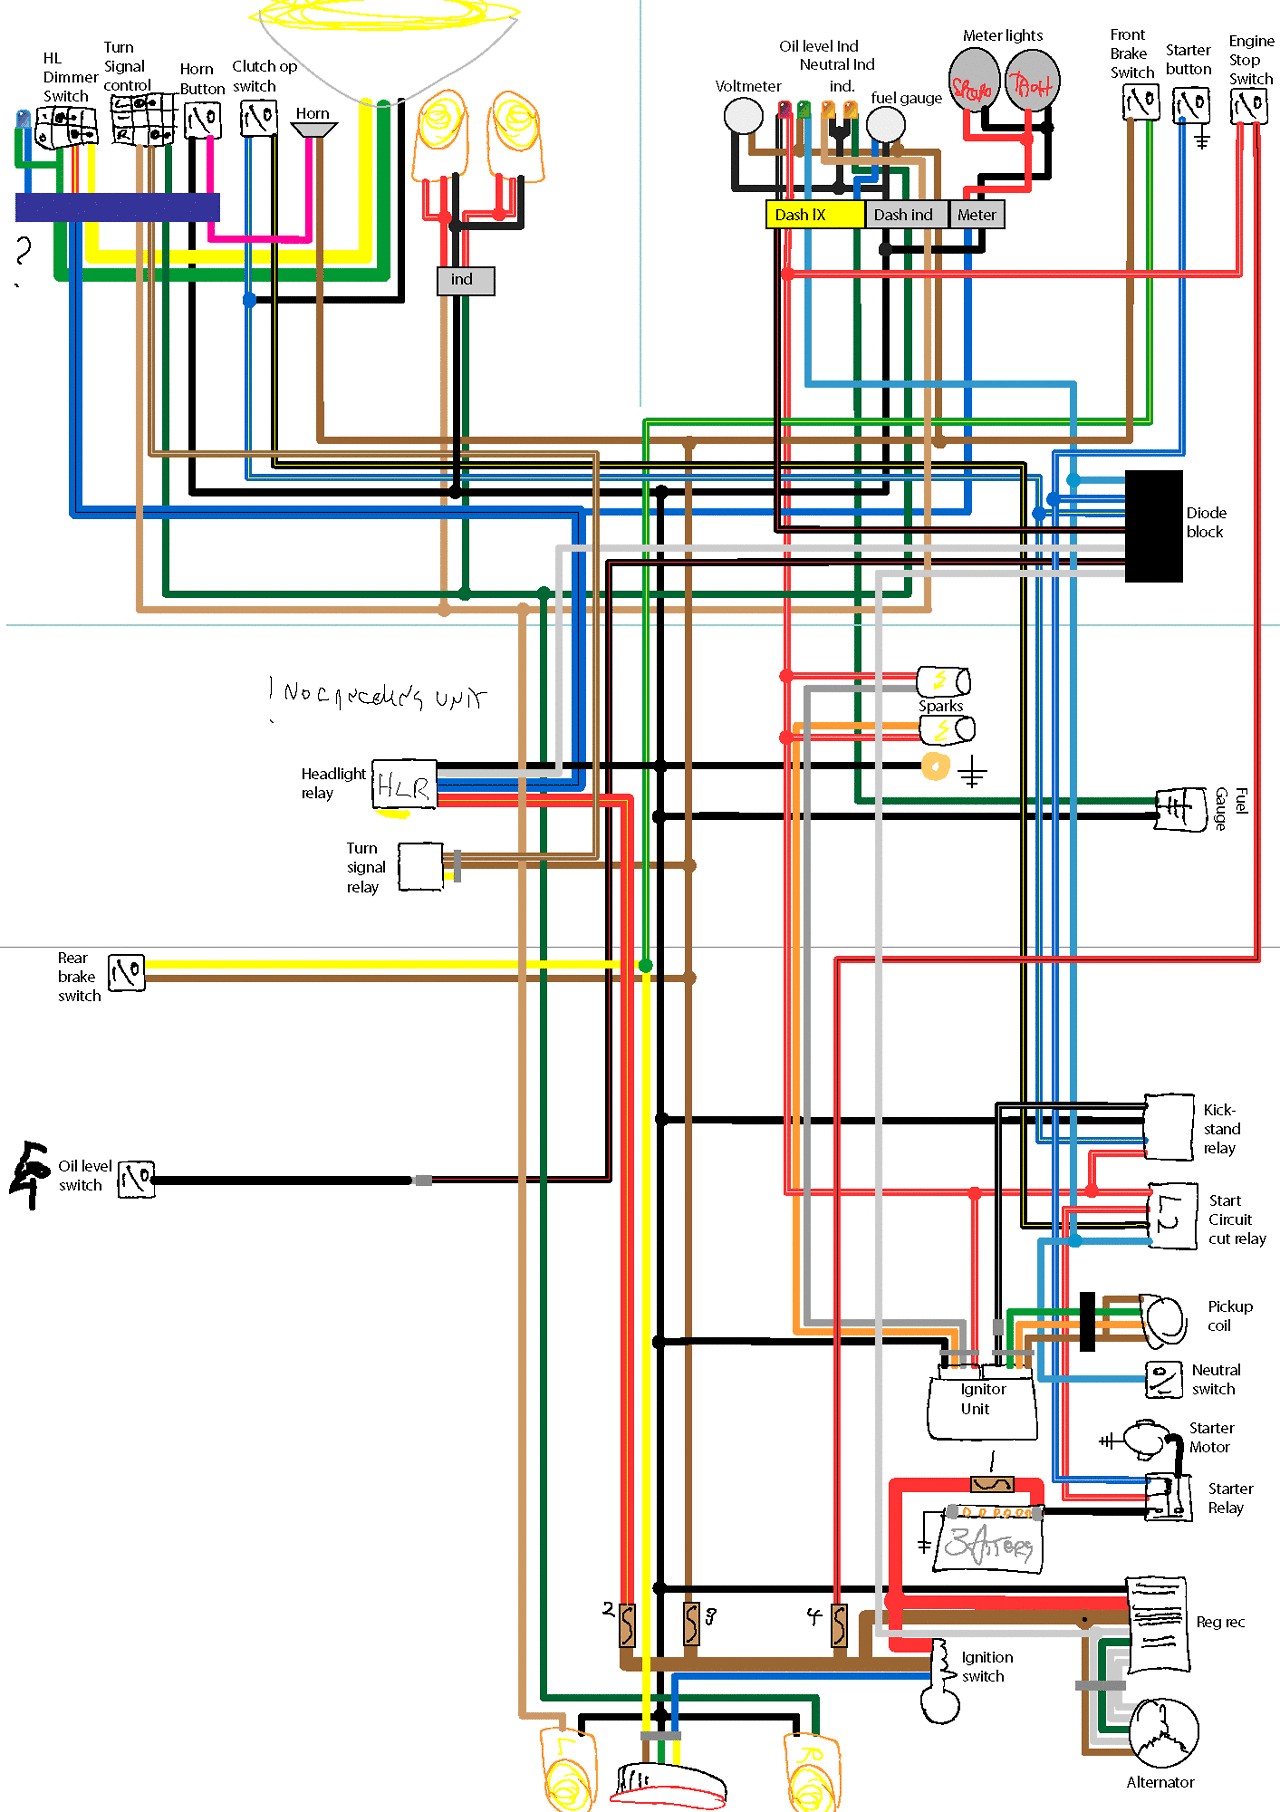 Engine Diagram Gif Land Rover Discovery Wiring Diagram Of Engine Diagram Gif